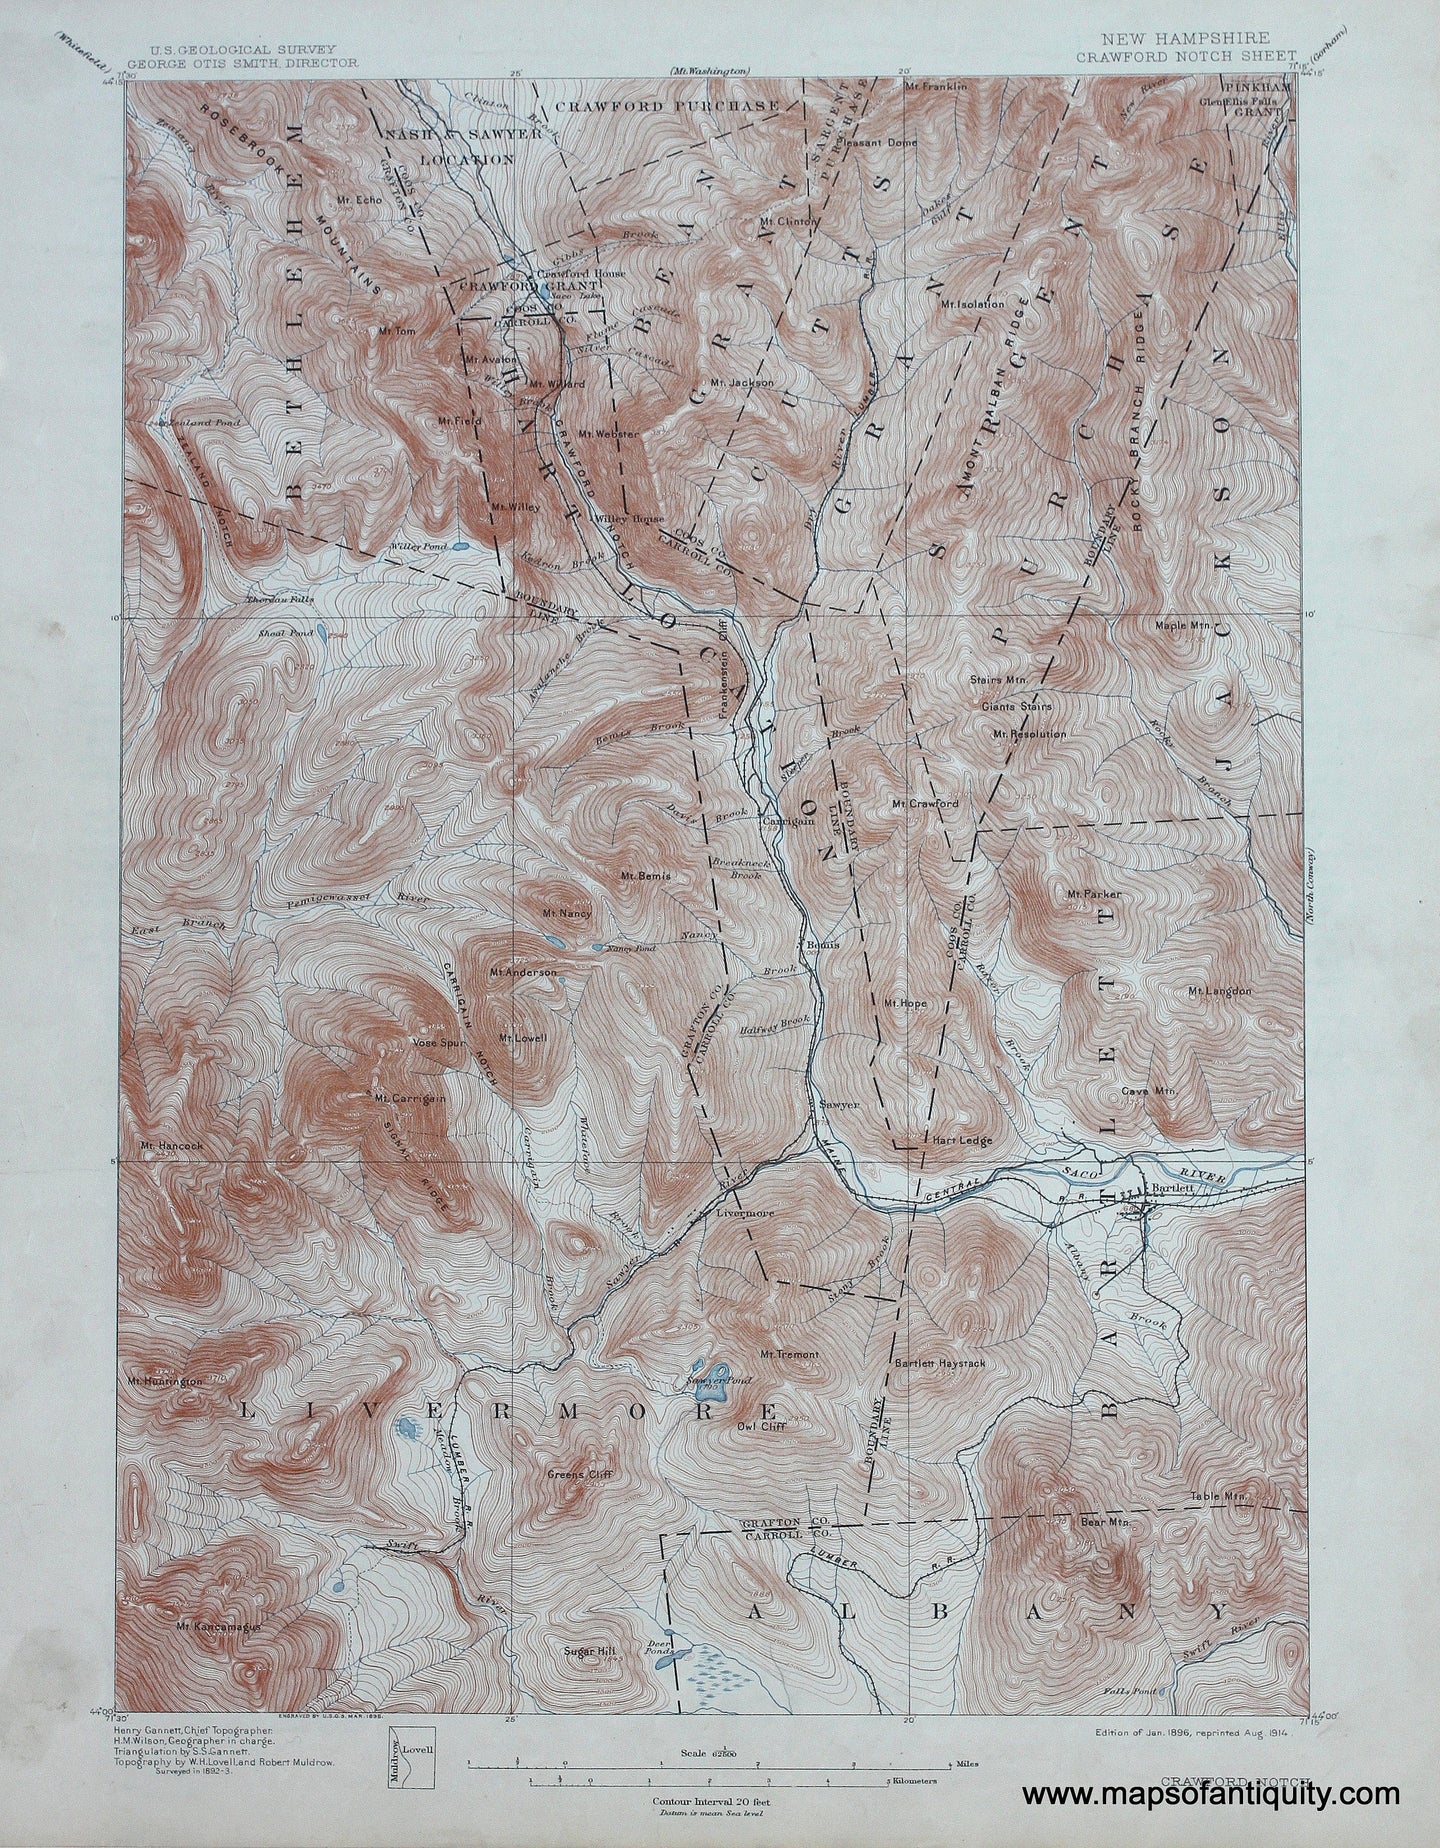 Genuine-Antique-Map-Crawford-Notch--New-Hampshire--1914-US-Geological-Survey--Maps-Of-Antiquity